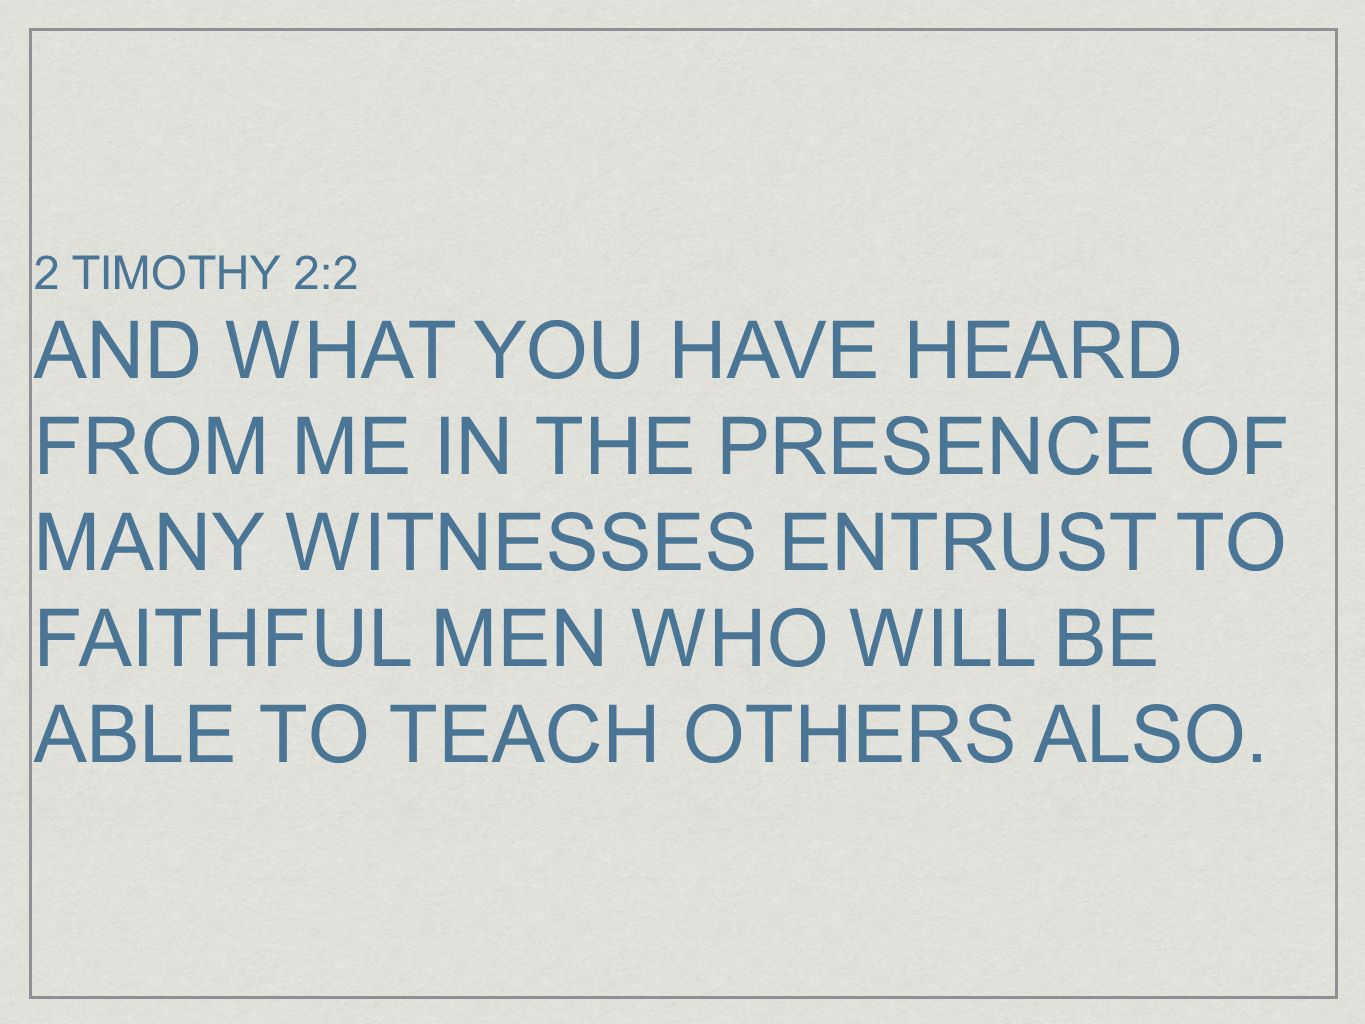 2 TIMOTHY 2:2 AND WHAT YOU HAVE HEARD FROM ME IN THE PRESENCE OF MANY WITNESSES ENTRUST TO FAITHFUL MEN WHO WILL BE ABLE TO TEACH OTHERS ALSO.